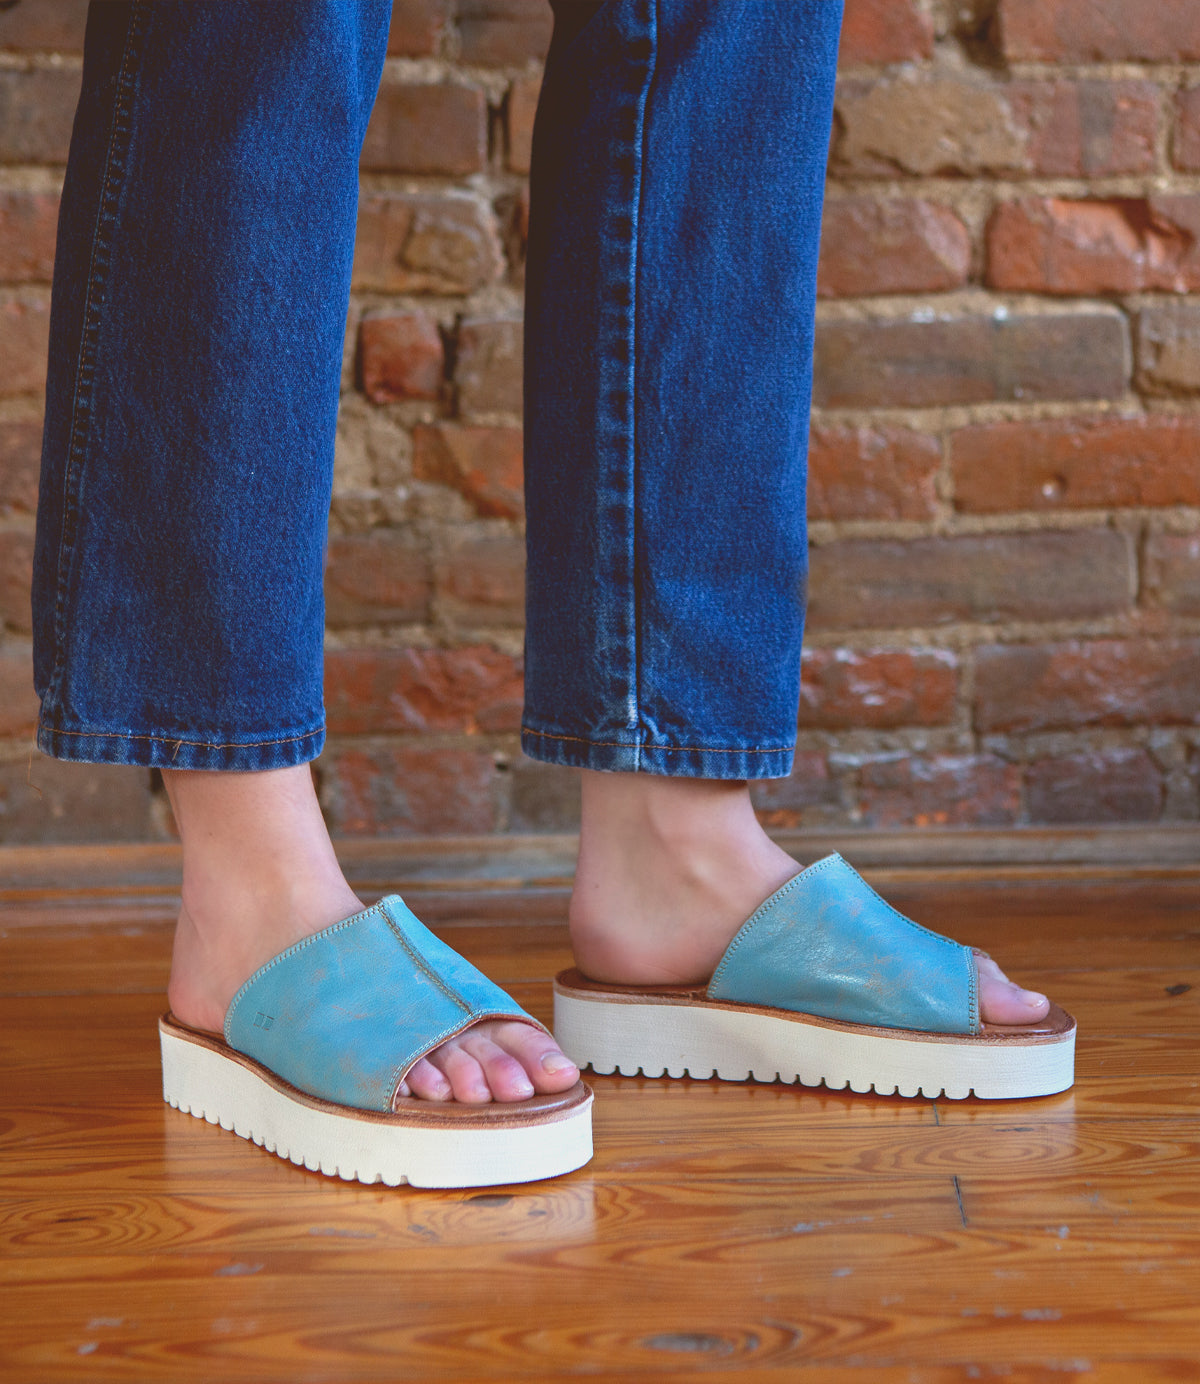 A person wearing stylish blue Fairlee II leather slide sandals from Bed Stu.